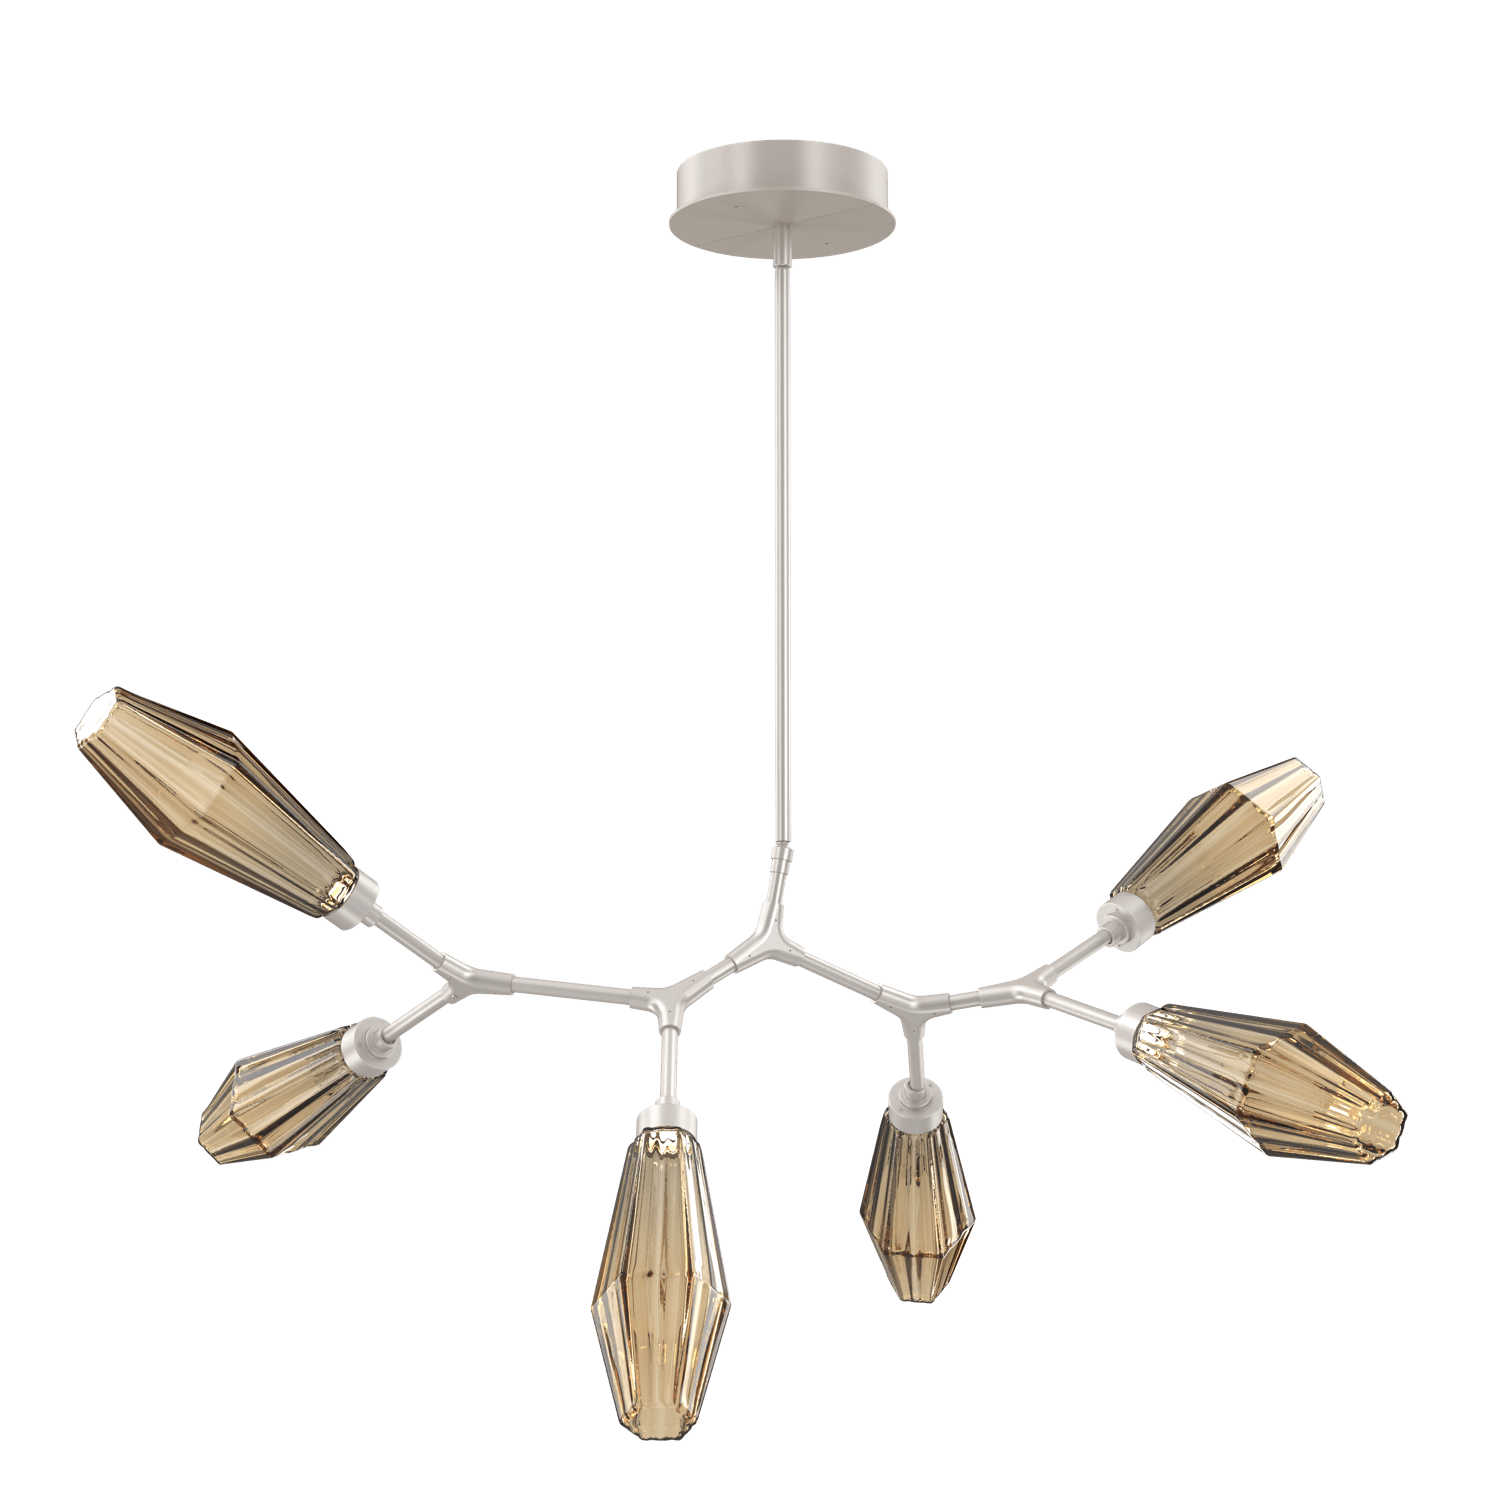 PLB0049-BA-BS-RB-Hammerton-Studio-Aalto-6-light-modern-branch-chandelier-with-metallic-beige-silver-finish-and-optic-ribbed-bronze-glass-shades-and-LED-lamping